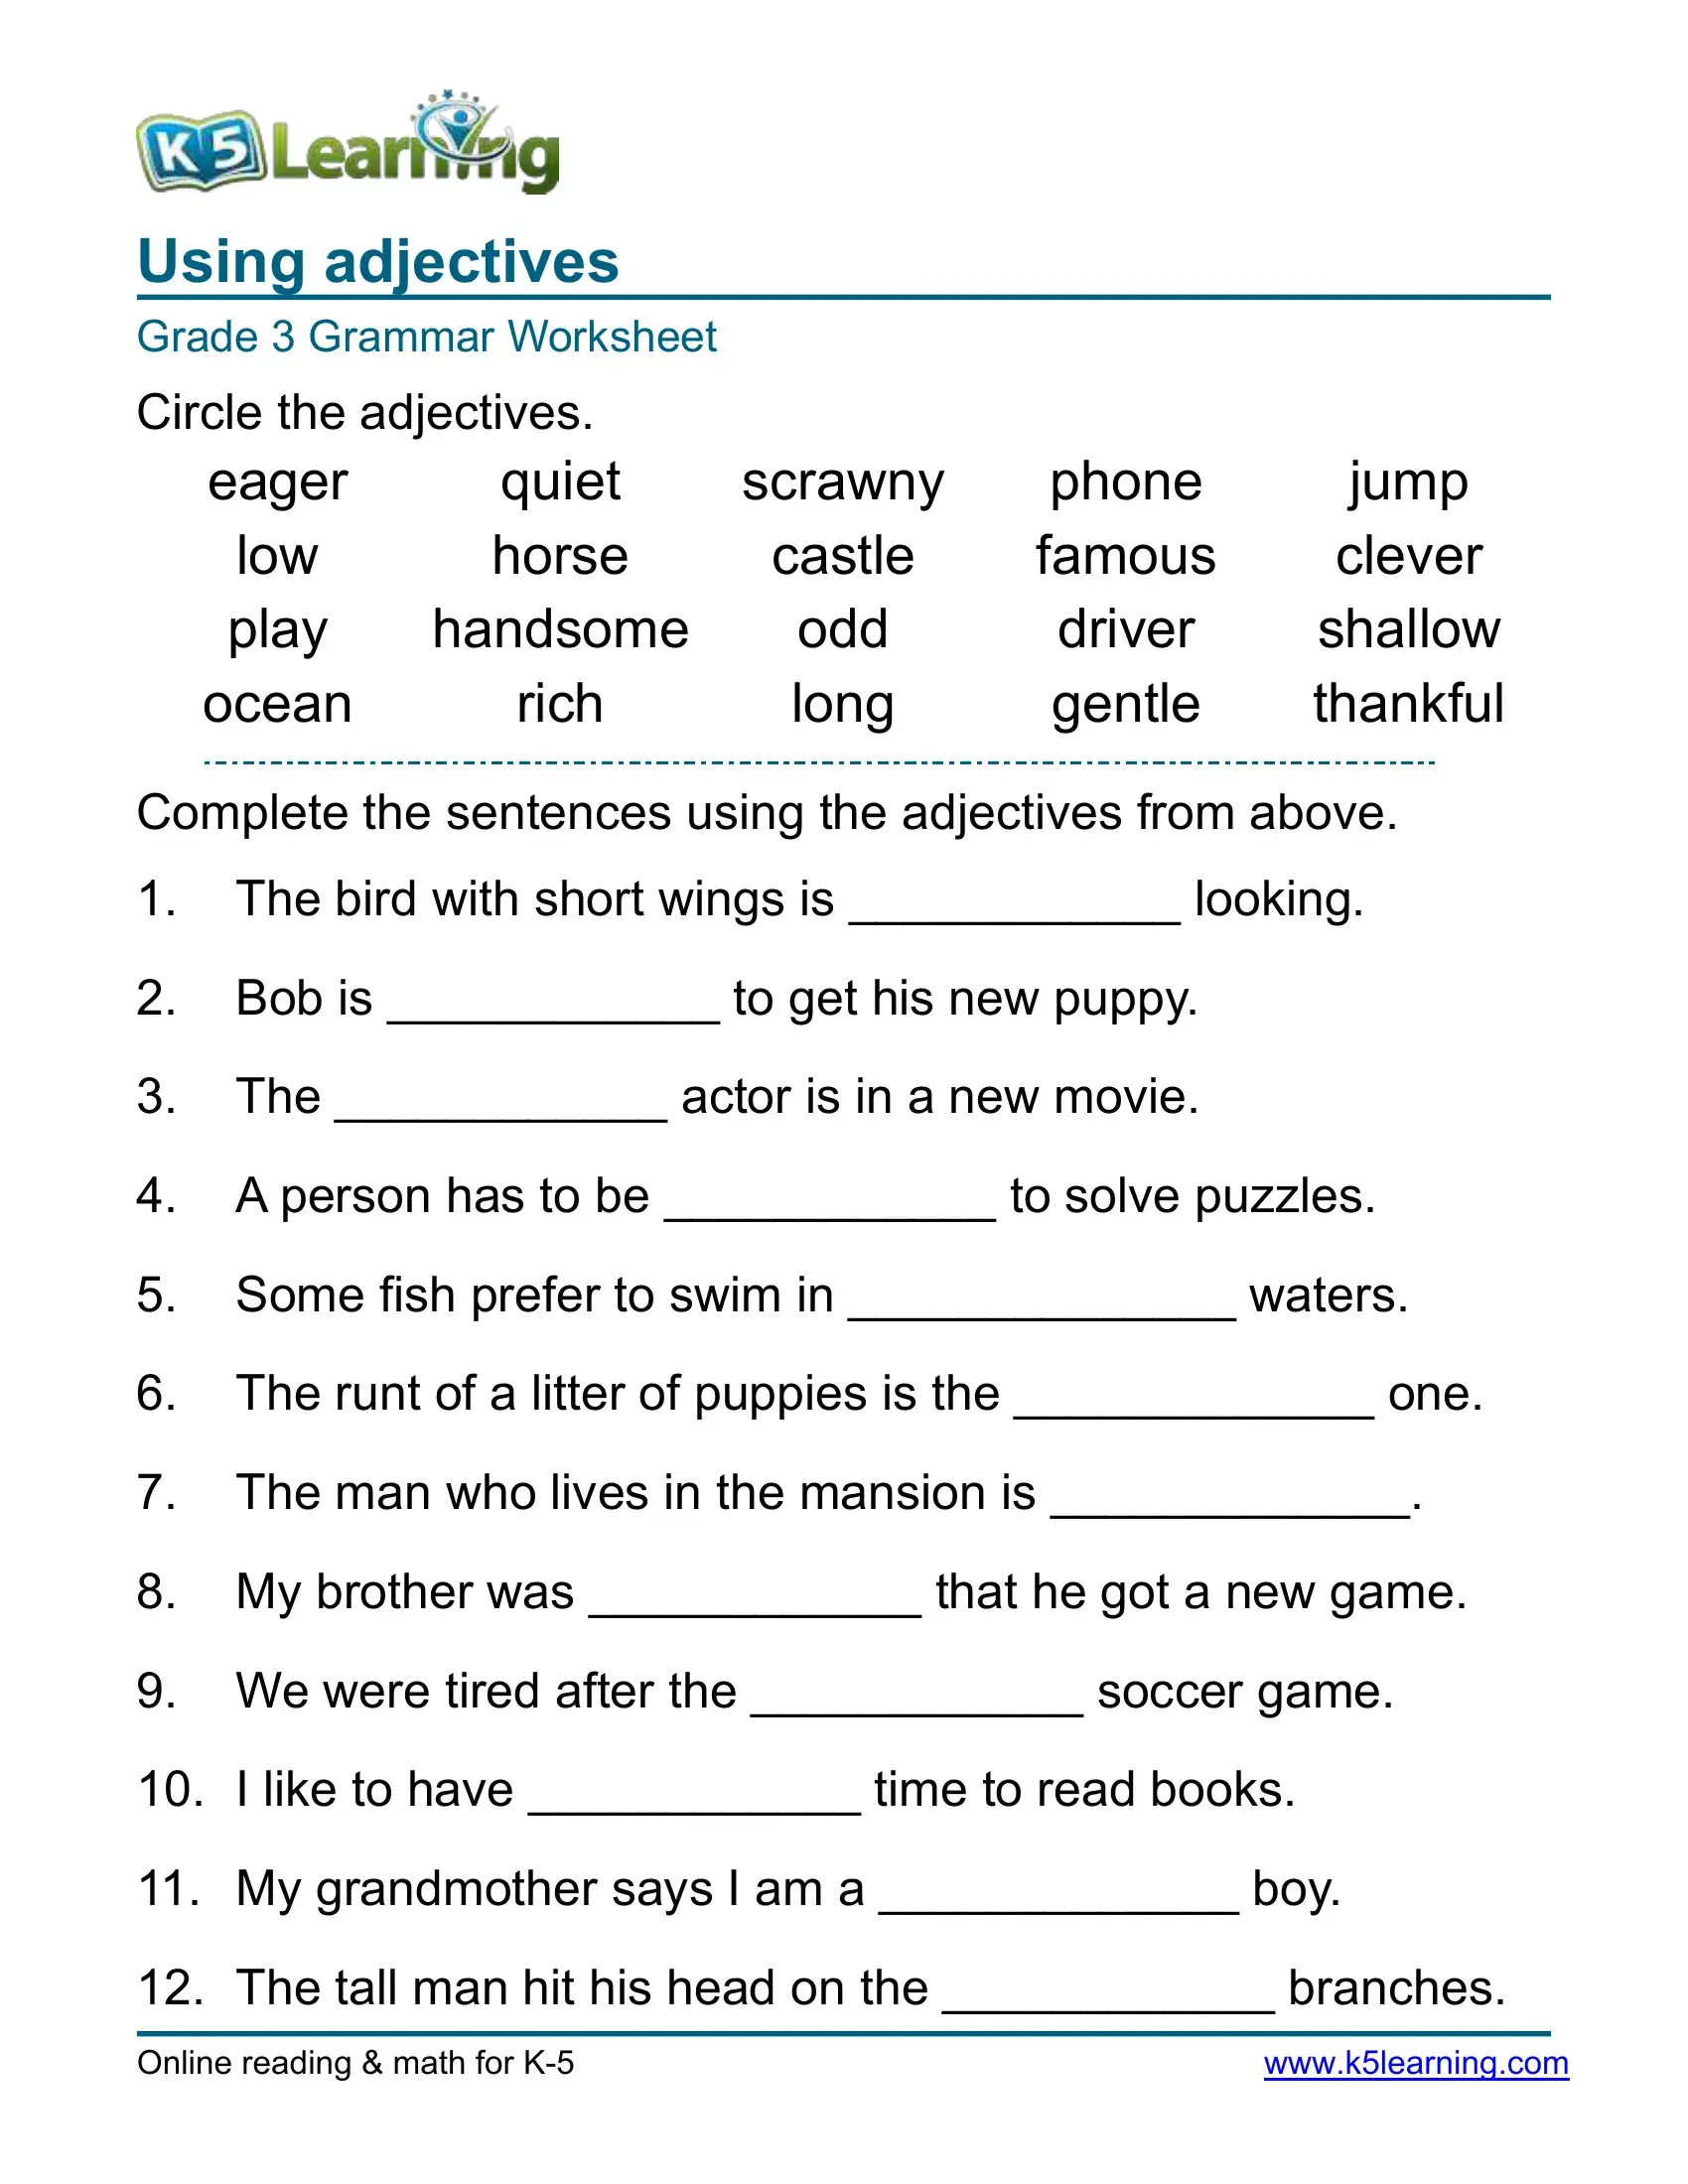 Test for the 9th form 3. Worksheets 5 класс английский. Worksheets 5 класс English Grammar. Английская грамматика Worksheets. Worksheets 6 класс English.